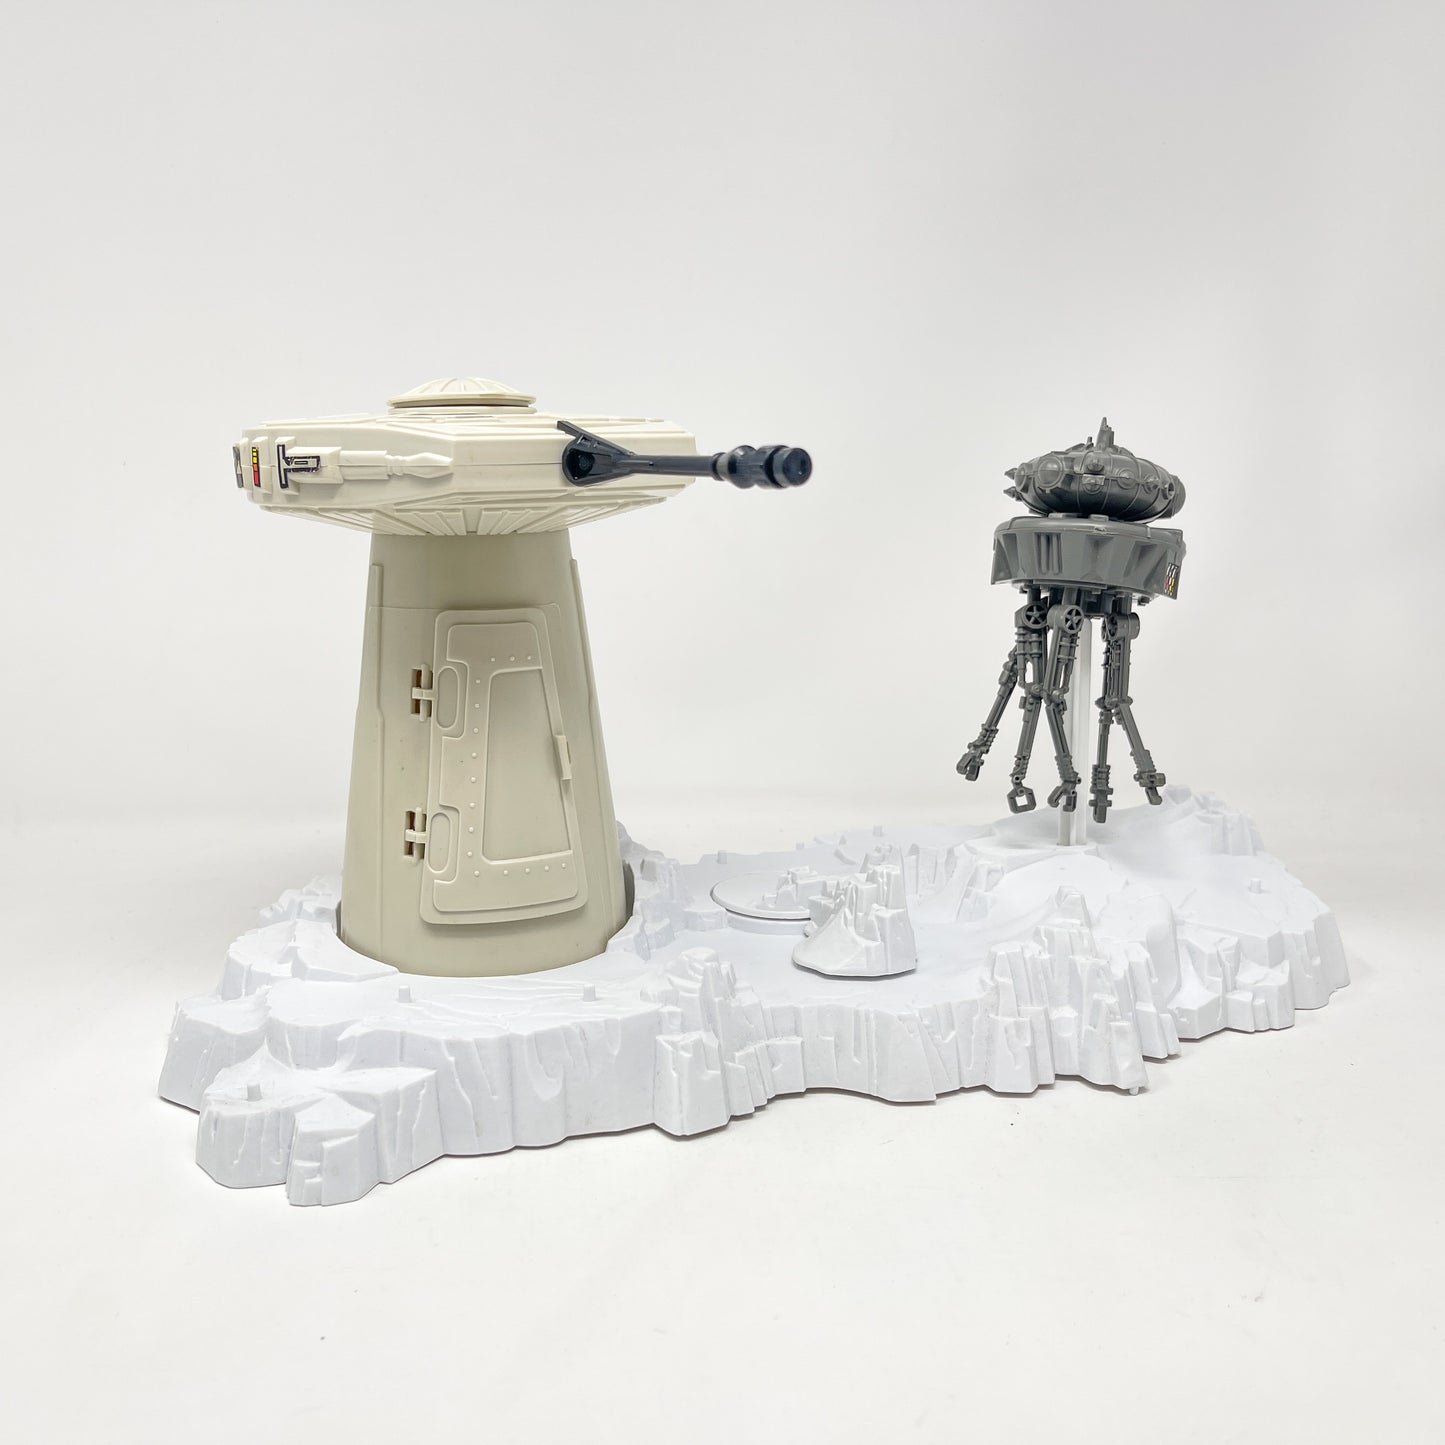 Hoth Turret and Probot Playset - Complete in Box